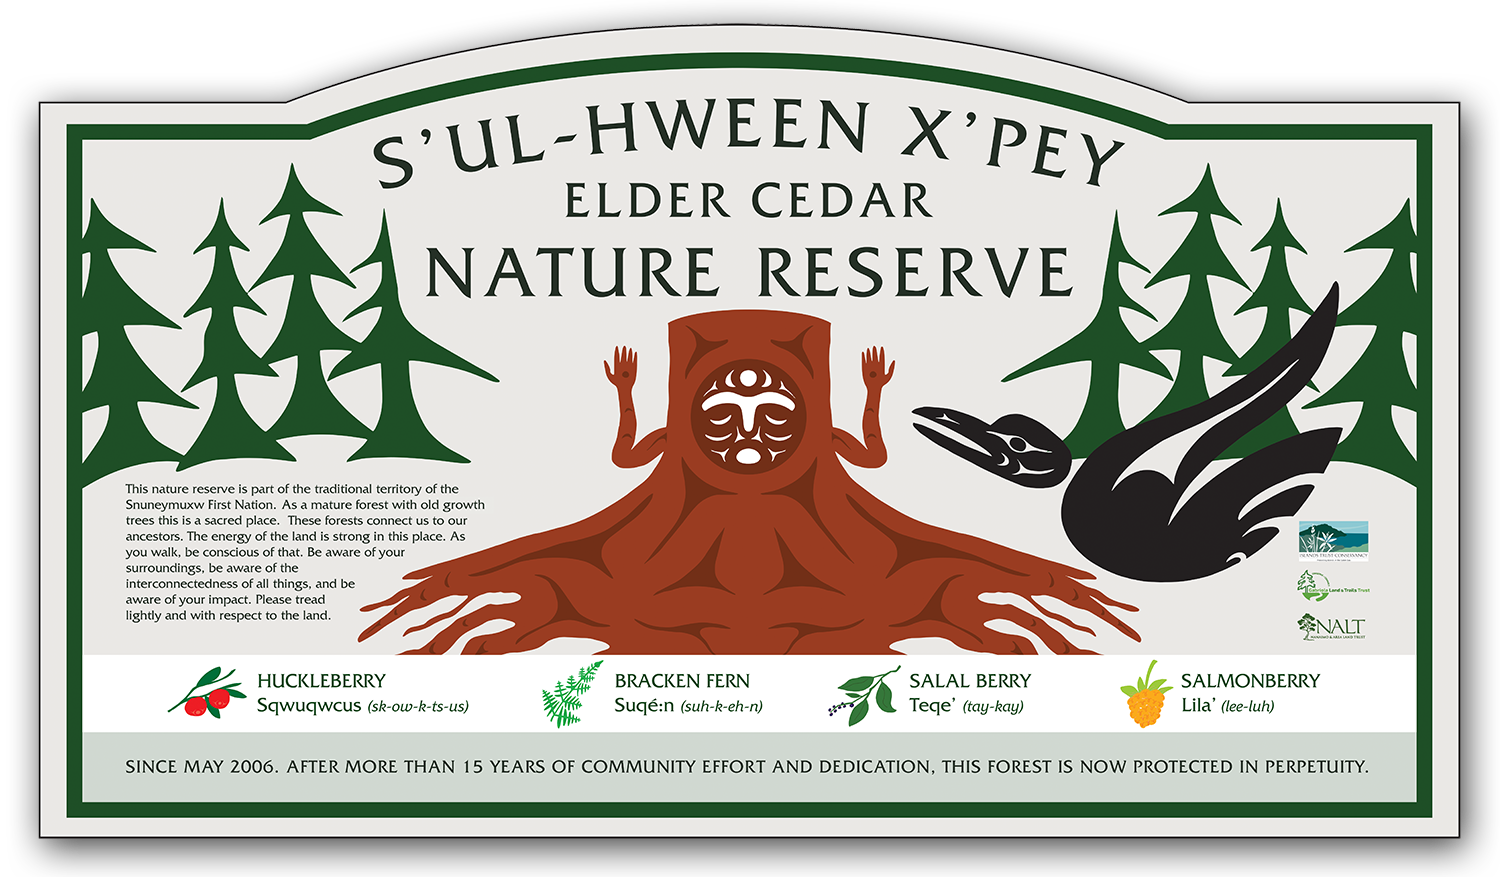 Welcome sign for S'uh-hween X'pey Nature Reserve (Elder Cedar), designed and installed in 2021